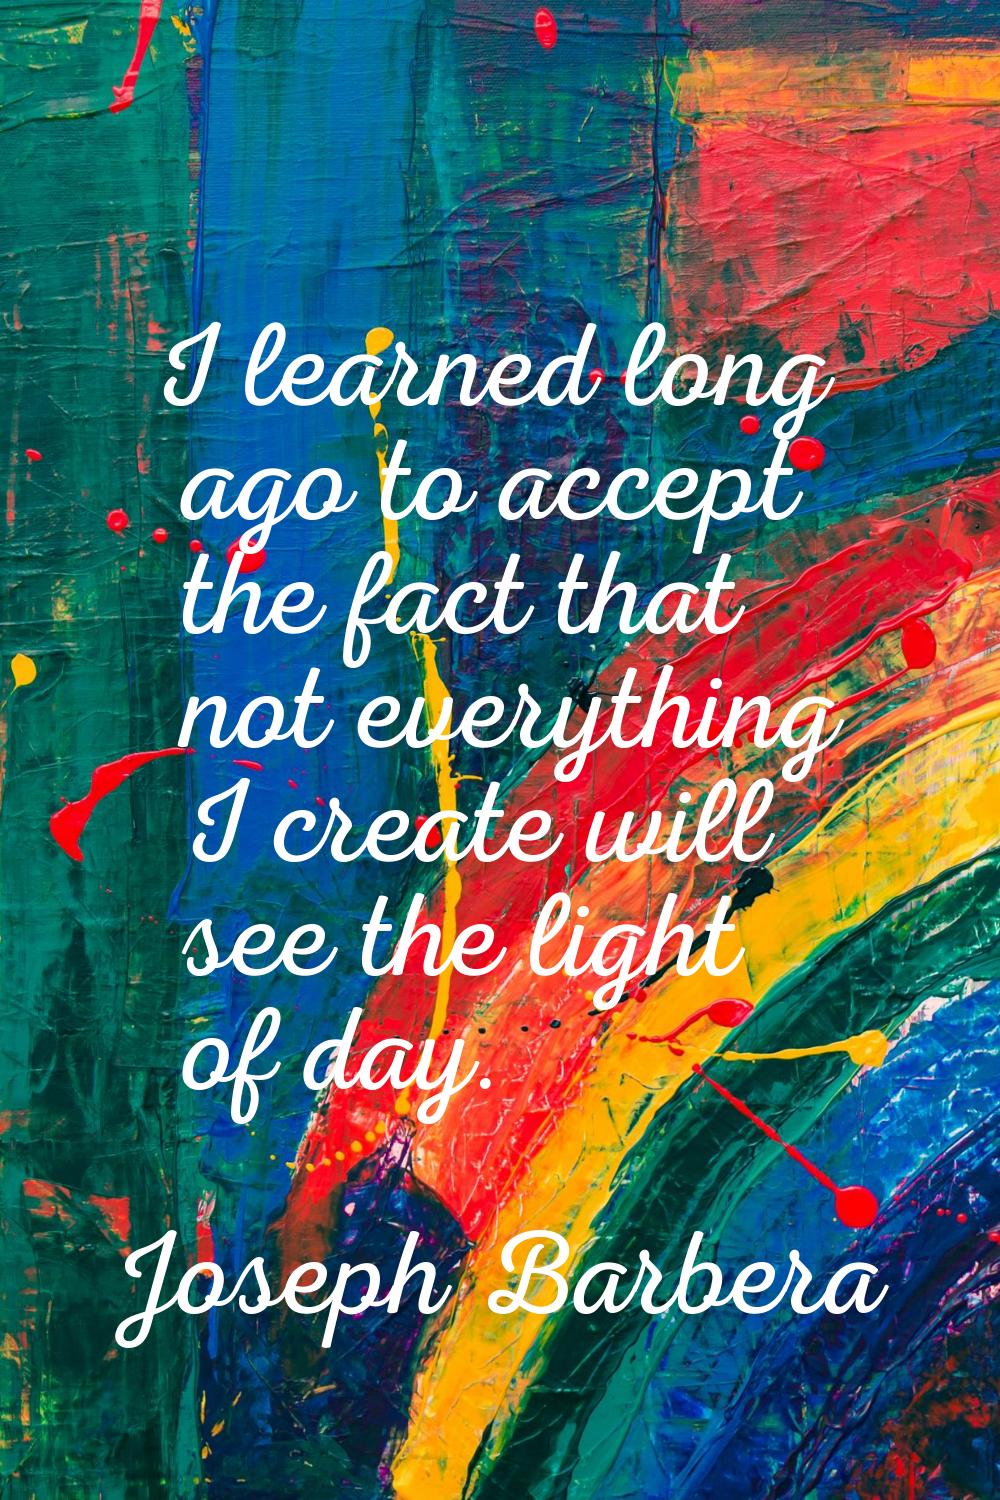 I learned long ago to accept the fact that not everything I create will see the light of day.